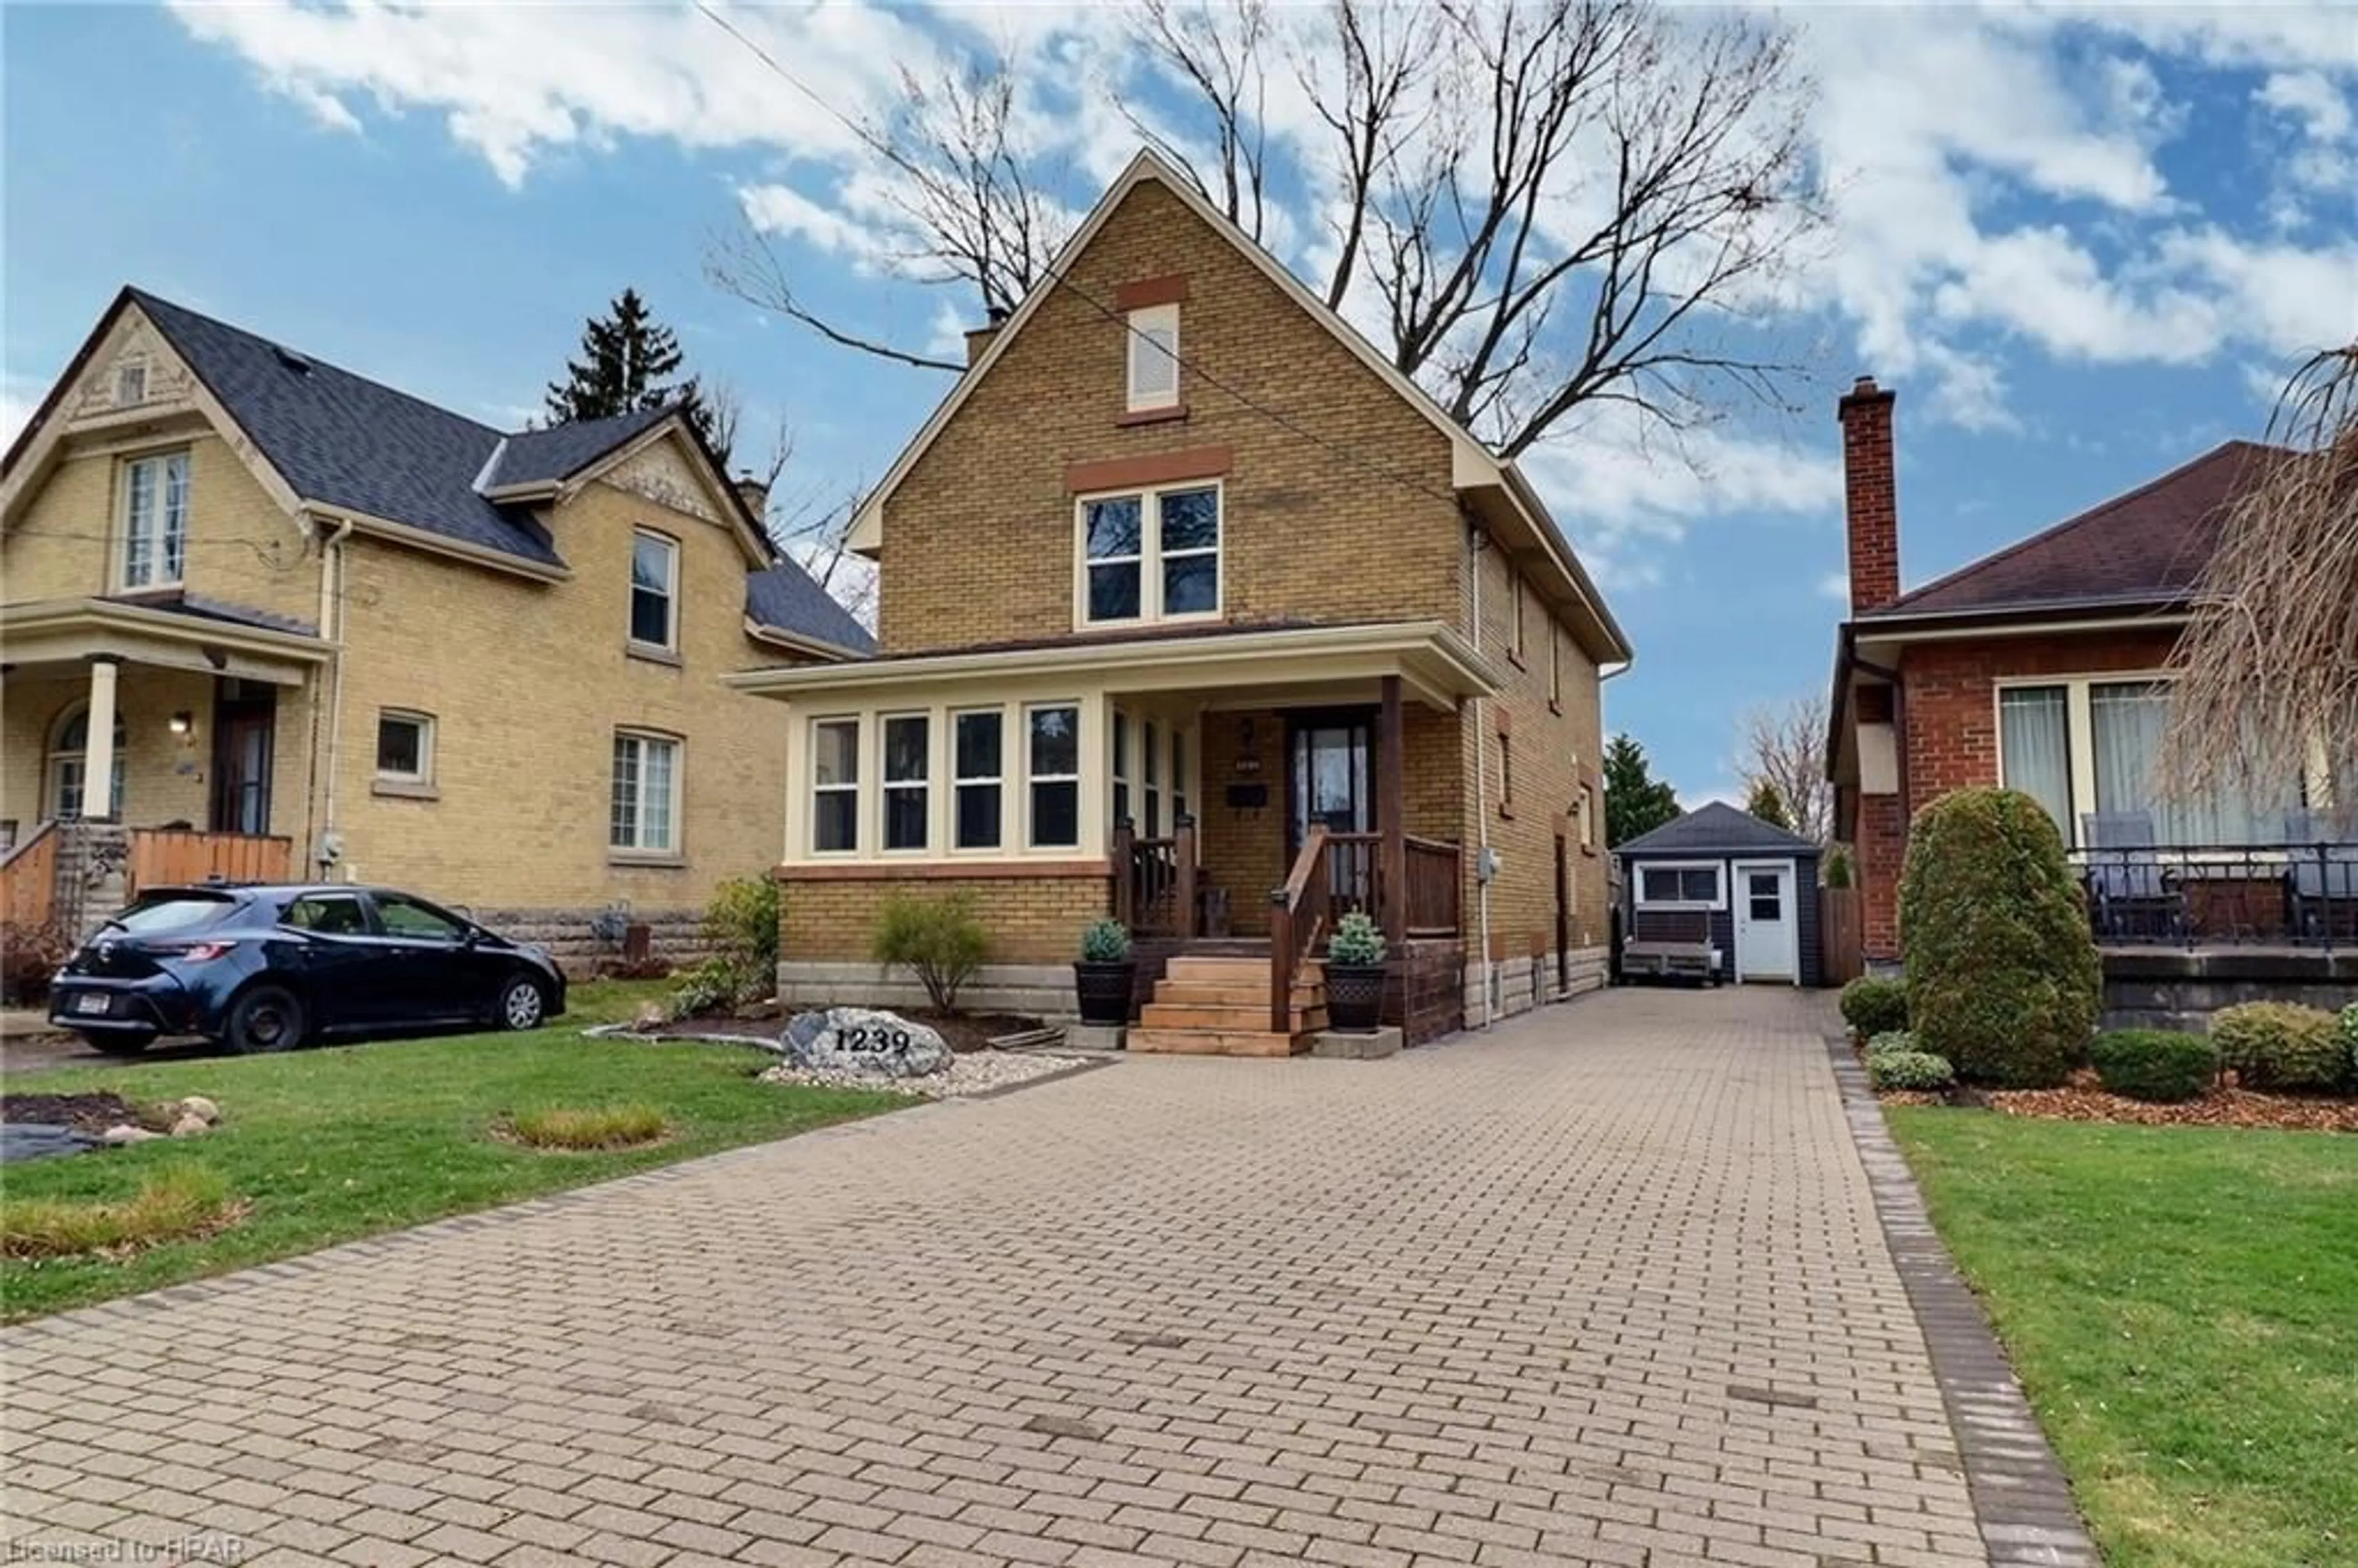 Home with brick exterior material for 1239 King St, London Ontario N5W 2Y3